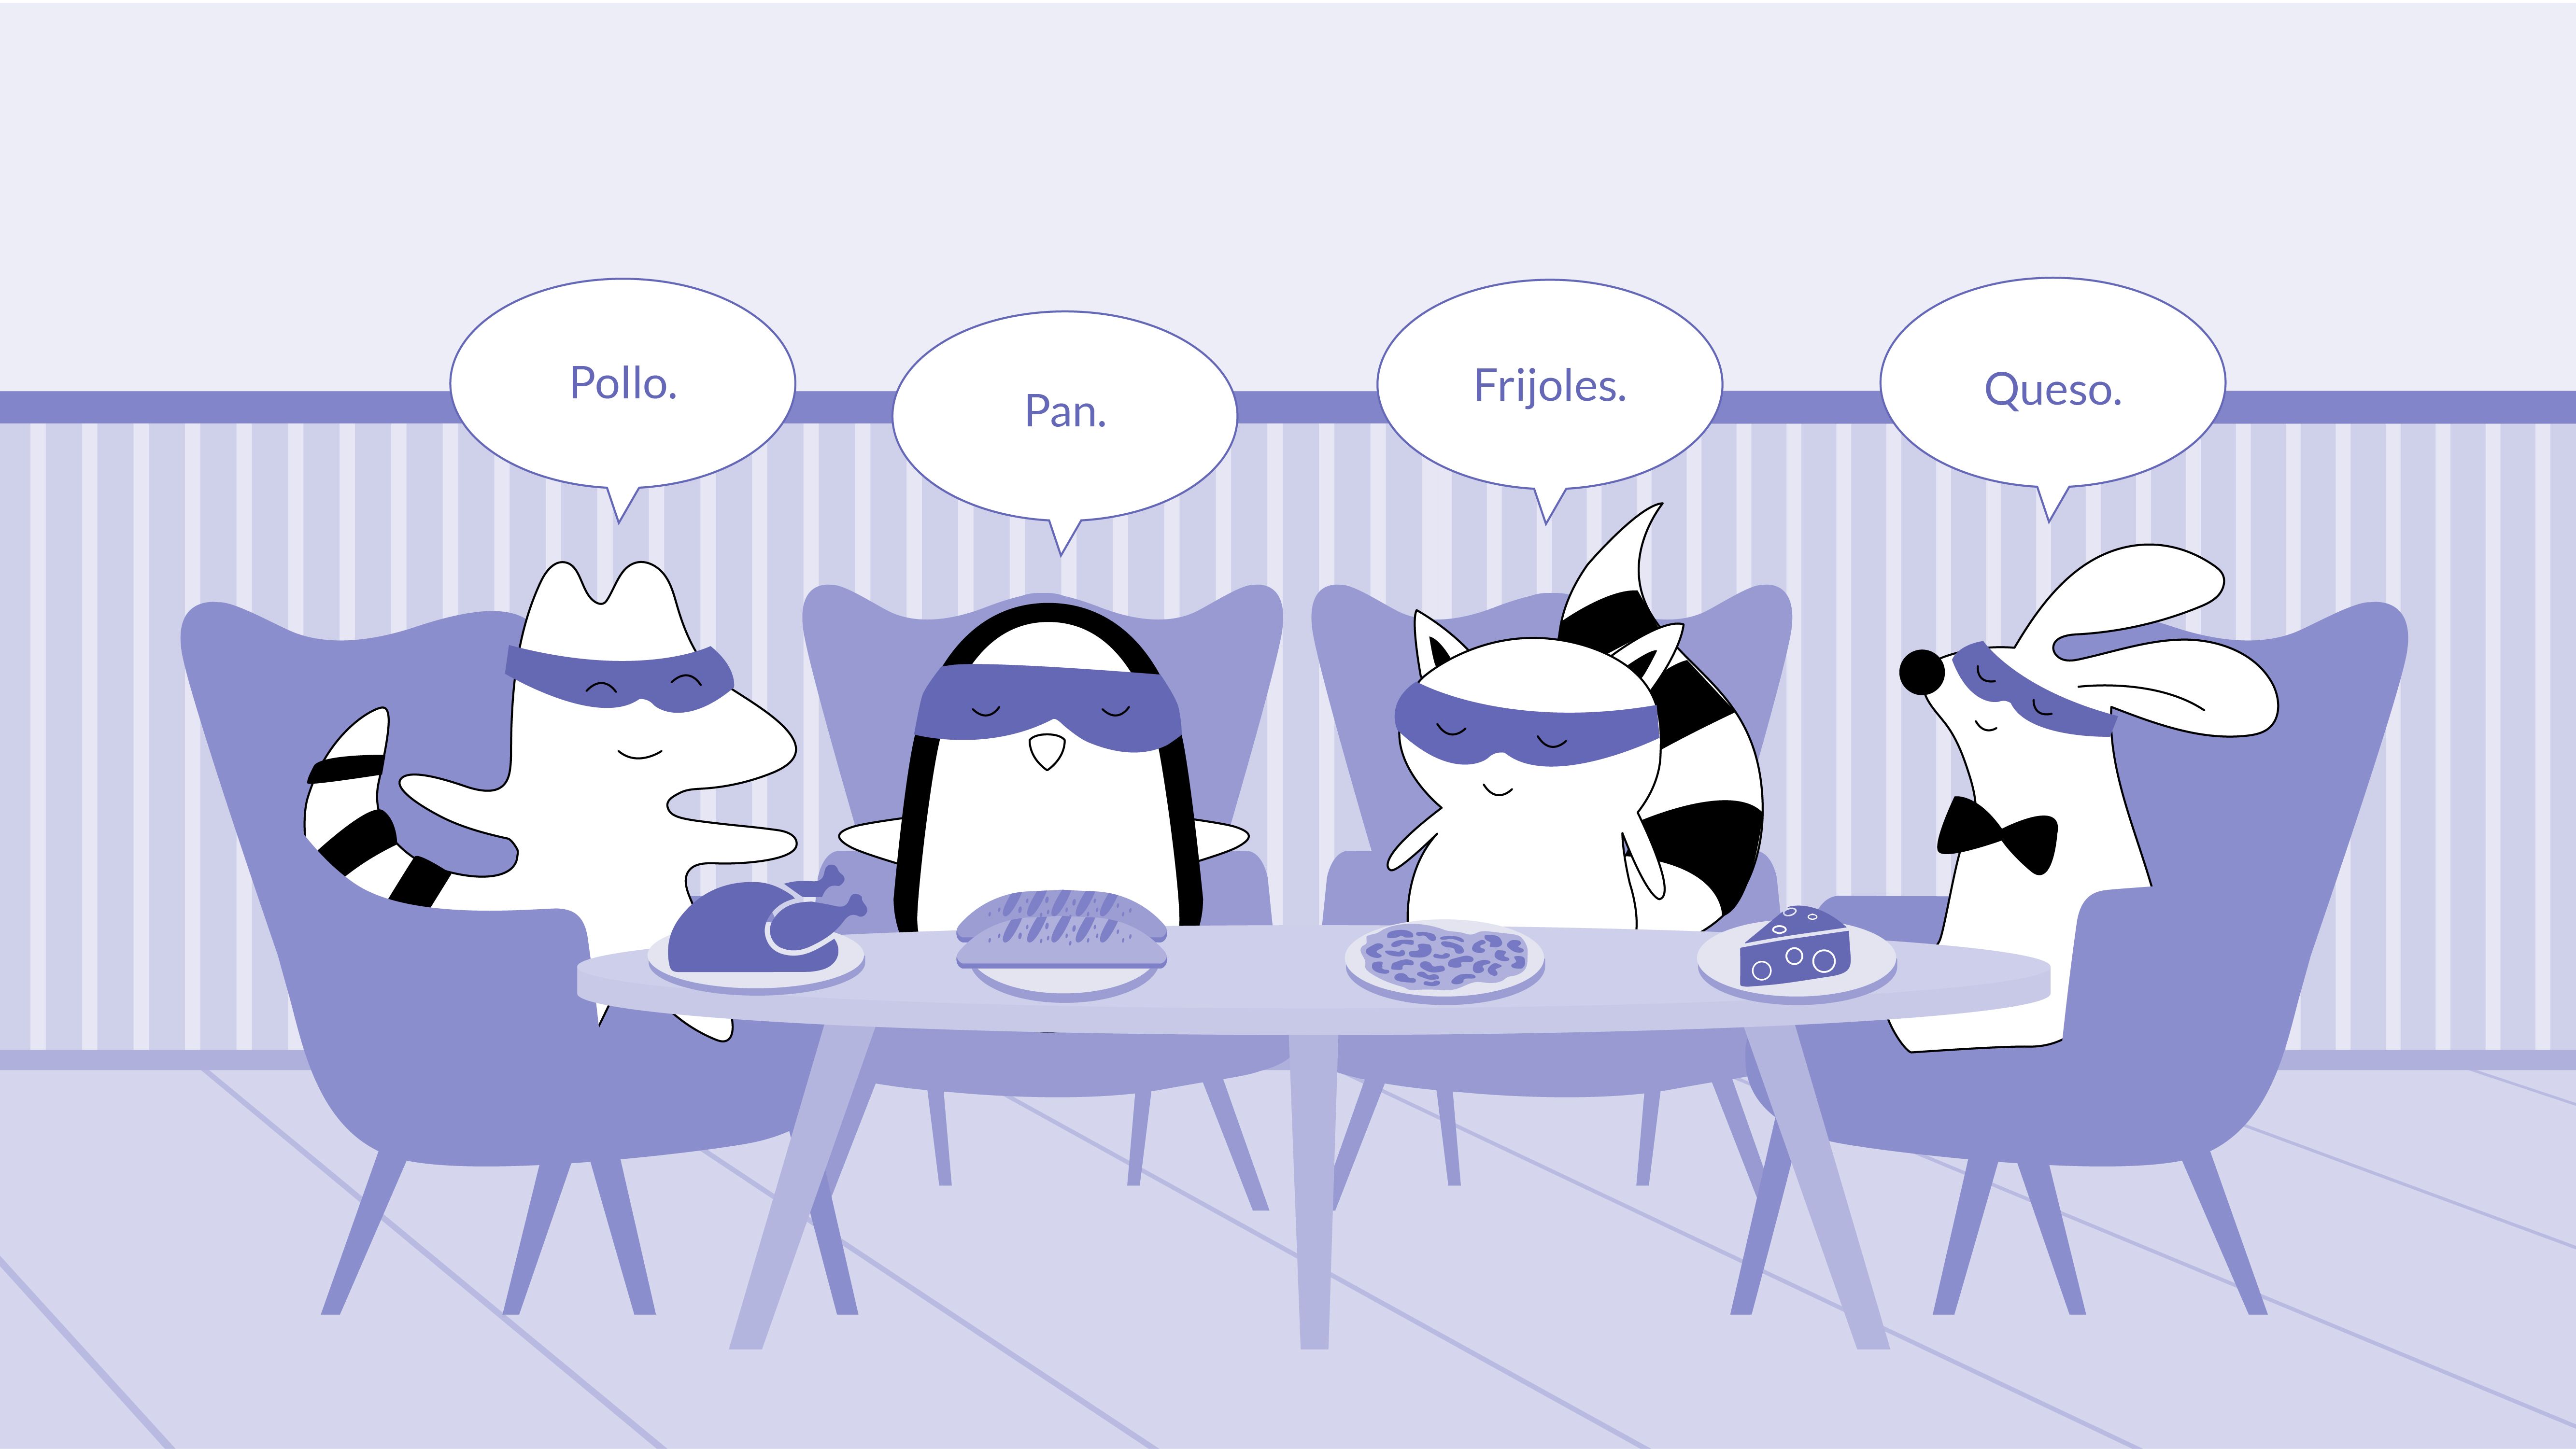 Soren, Iggy, Pocky, and Benji are sitting at the big round table, having dinner. They all name different foods in Spanish